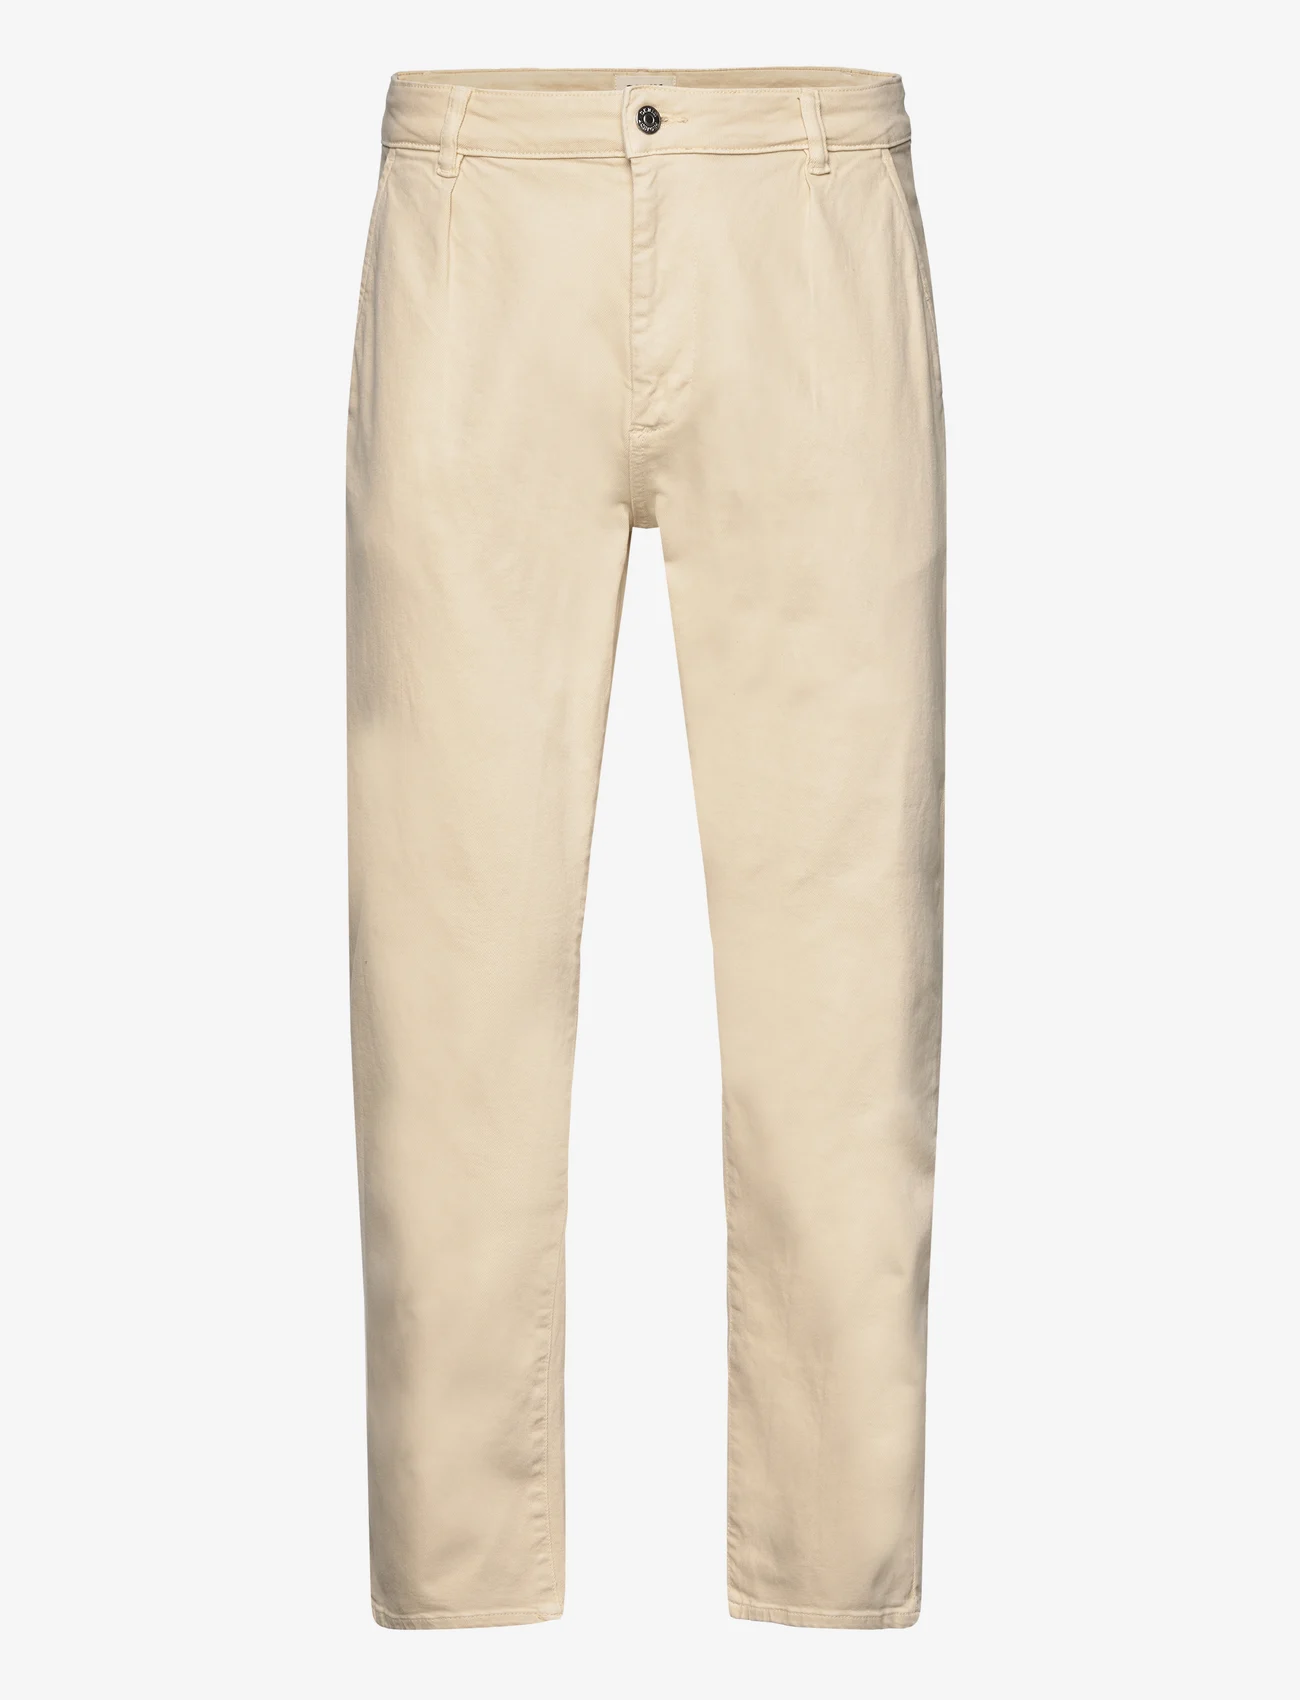 Denim project - DPChino Recycled Pants - chinos - bleached sand - 0